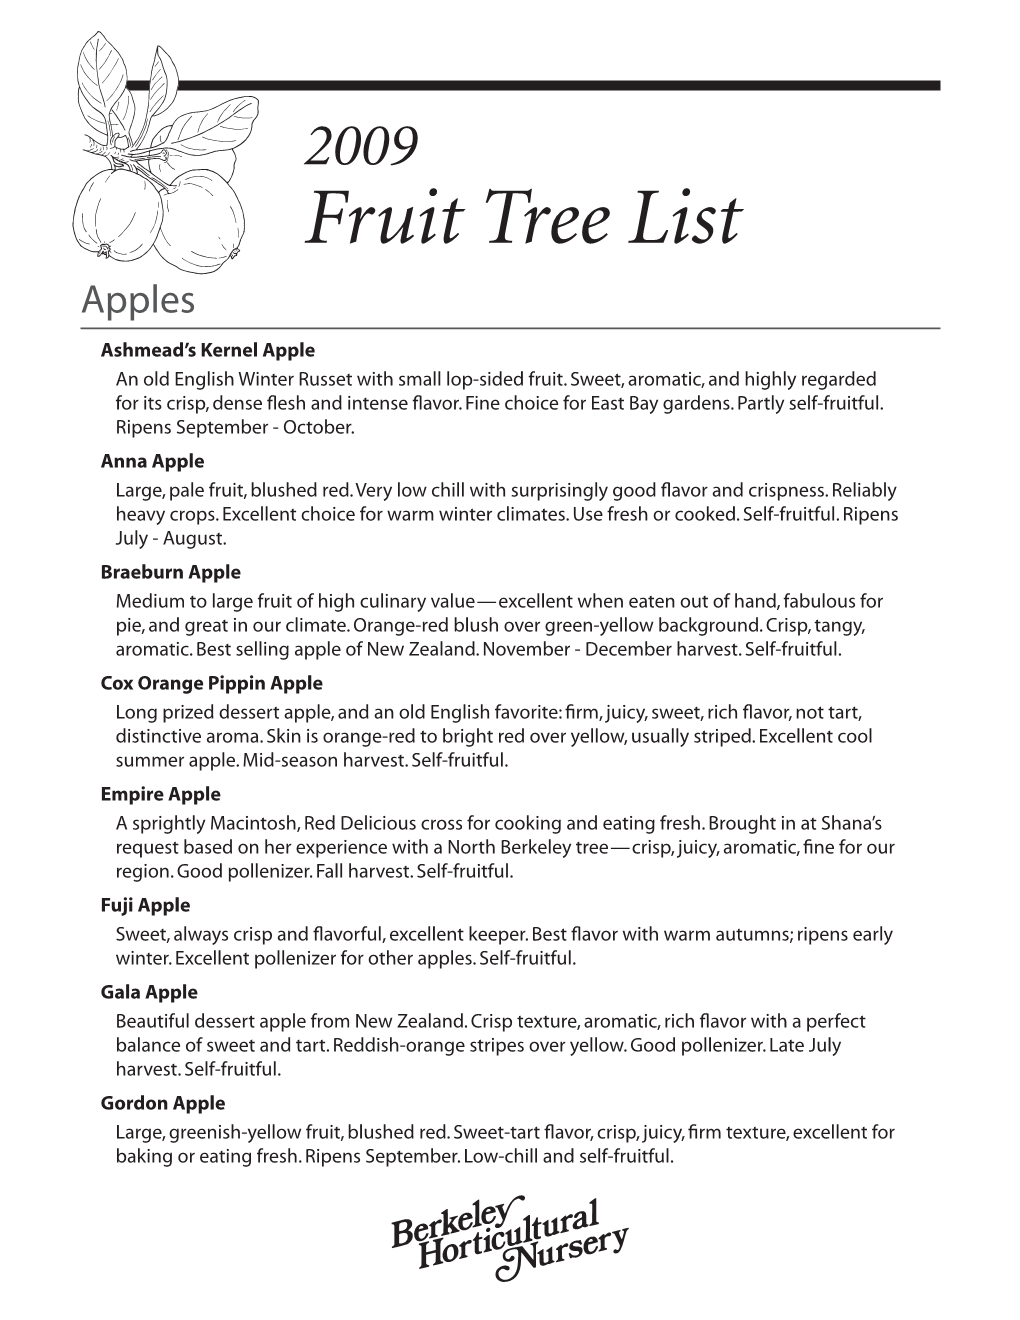 Fruit Tree List Apples Ashmead’S Kernel Apple an Old English Winter Russet with Small Lop-Sided Fruit